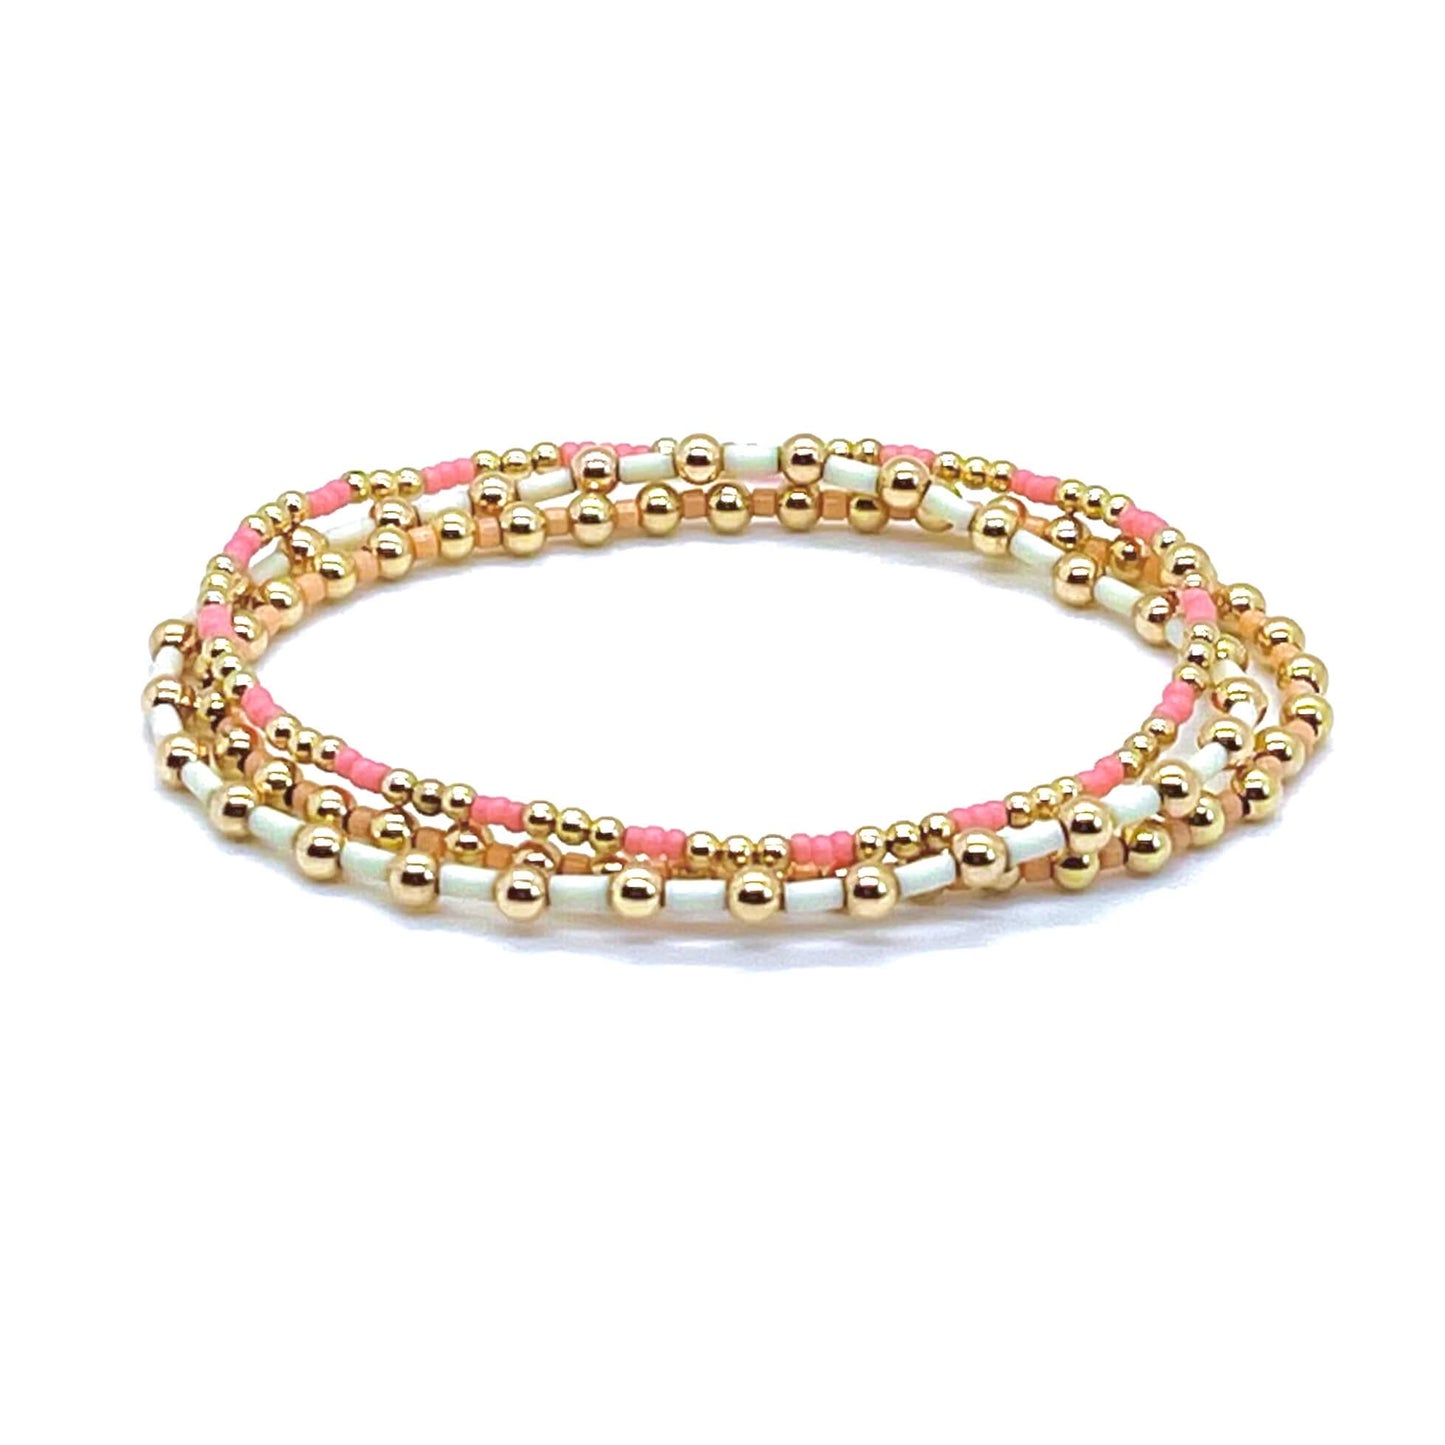 Gold filled bracelets with pink, white, and peach seed beads. Bracelet stack of 3 stretch bracelets.